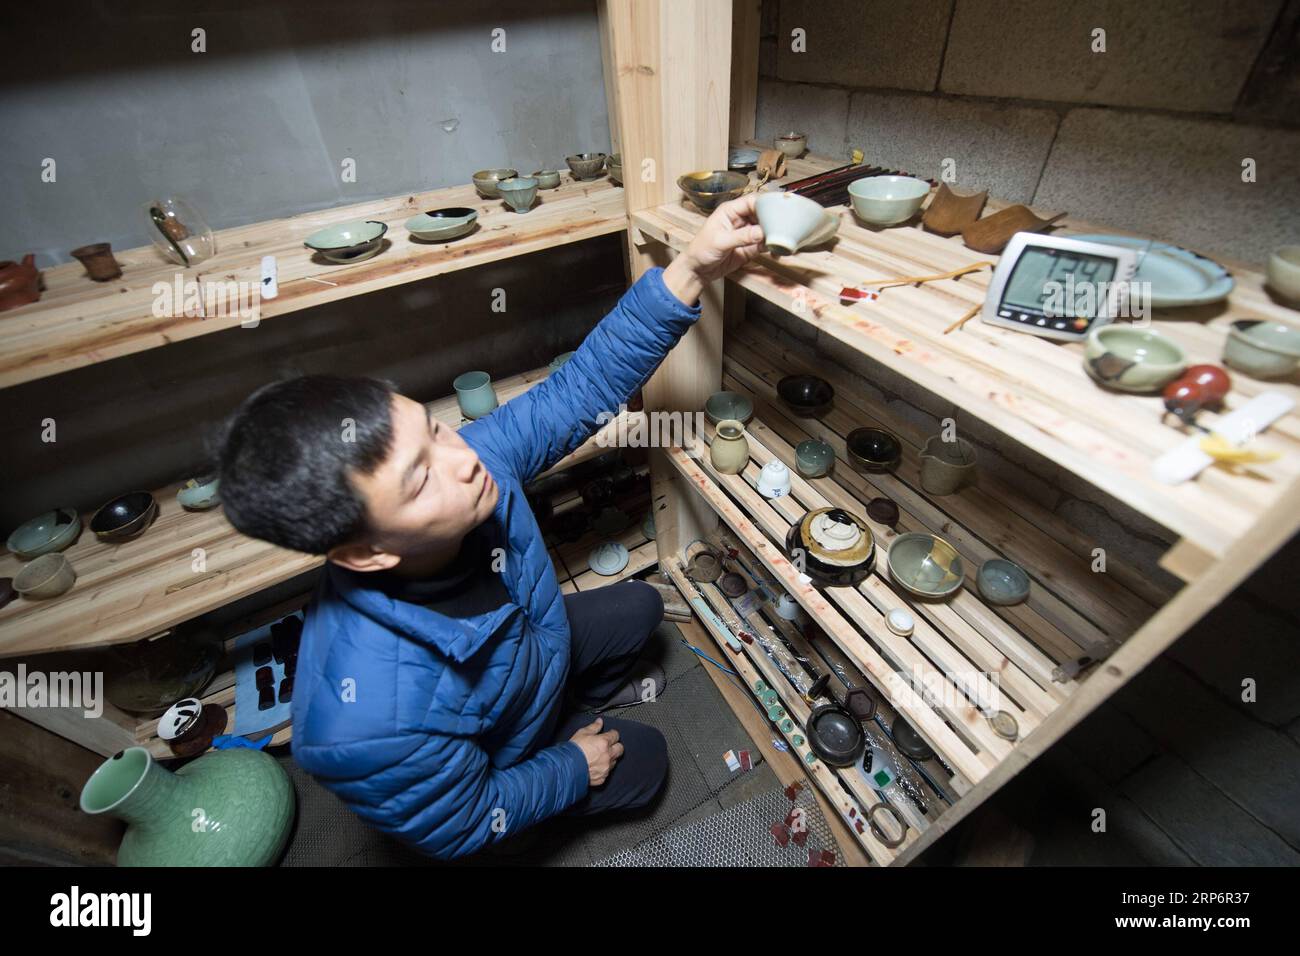 (190119) -- LONGQUAN, Jan. 19, 2019 (Xinhua) -- Wu Rongqiang checks dried lacquerwares at his studio in Niutouling Village, Longquan City of east China s Zhejiang Province, Jan. 15, 2019. Wu Rongqiang, a Longquan native aged 45, started exploring traditional lacquer art since 2012. In 2017, he moved his family to an old house deep in the mountains in Longquan in order to do more experiments in lacquer undisturbed. He uses lacquer to repair broken porcelain and to create lacquerware. Also, he experiments on the production of various lacquers. I feel so pleased to return to my hometown and do so Stock Photo